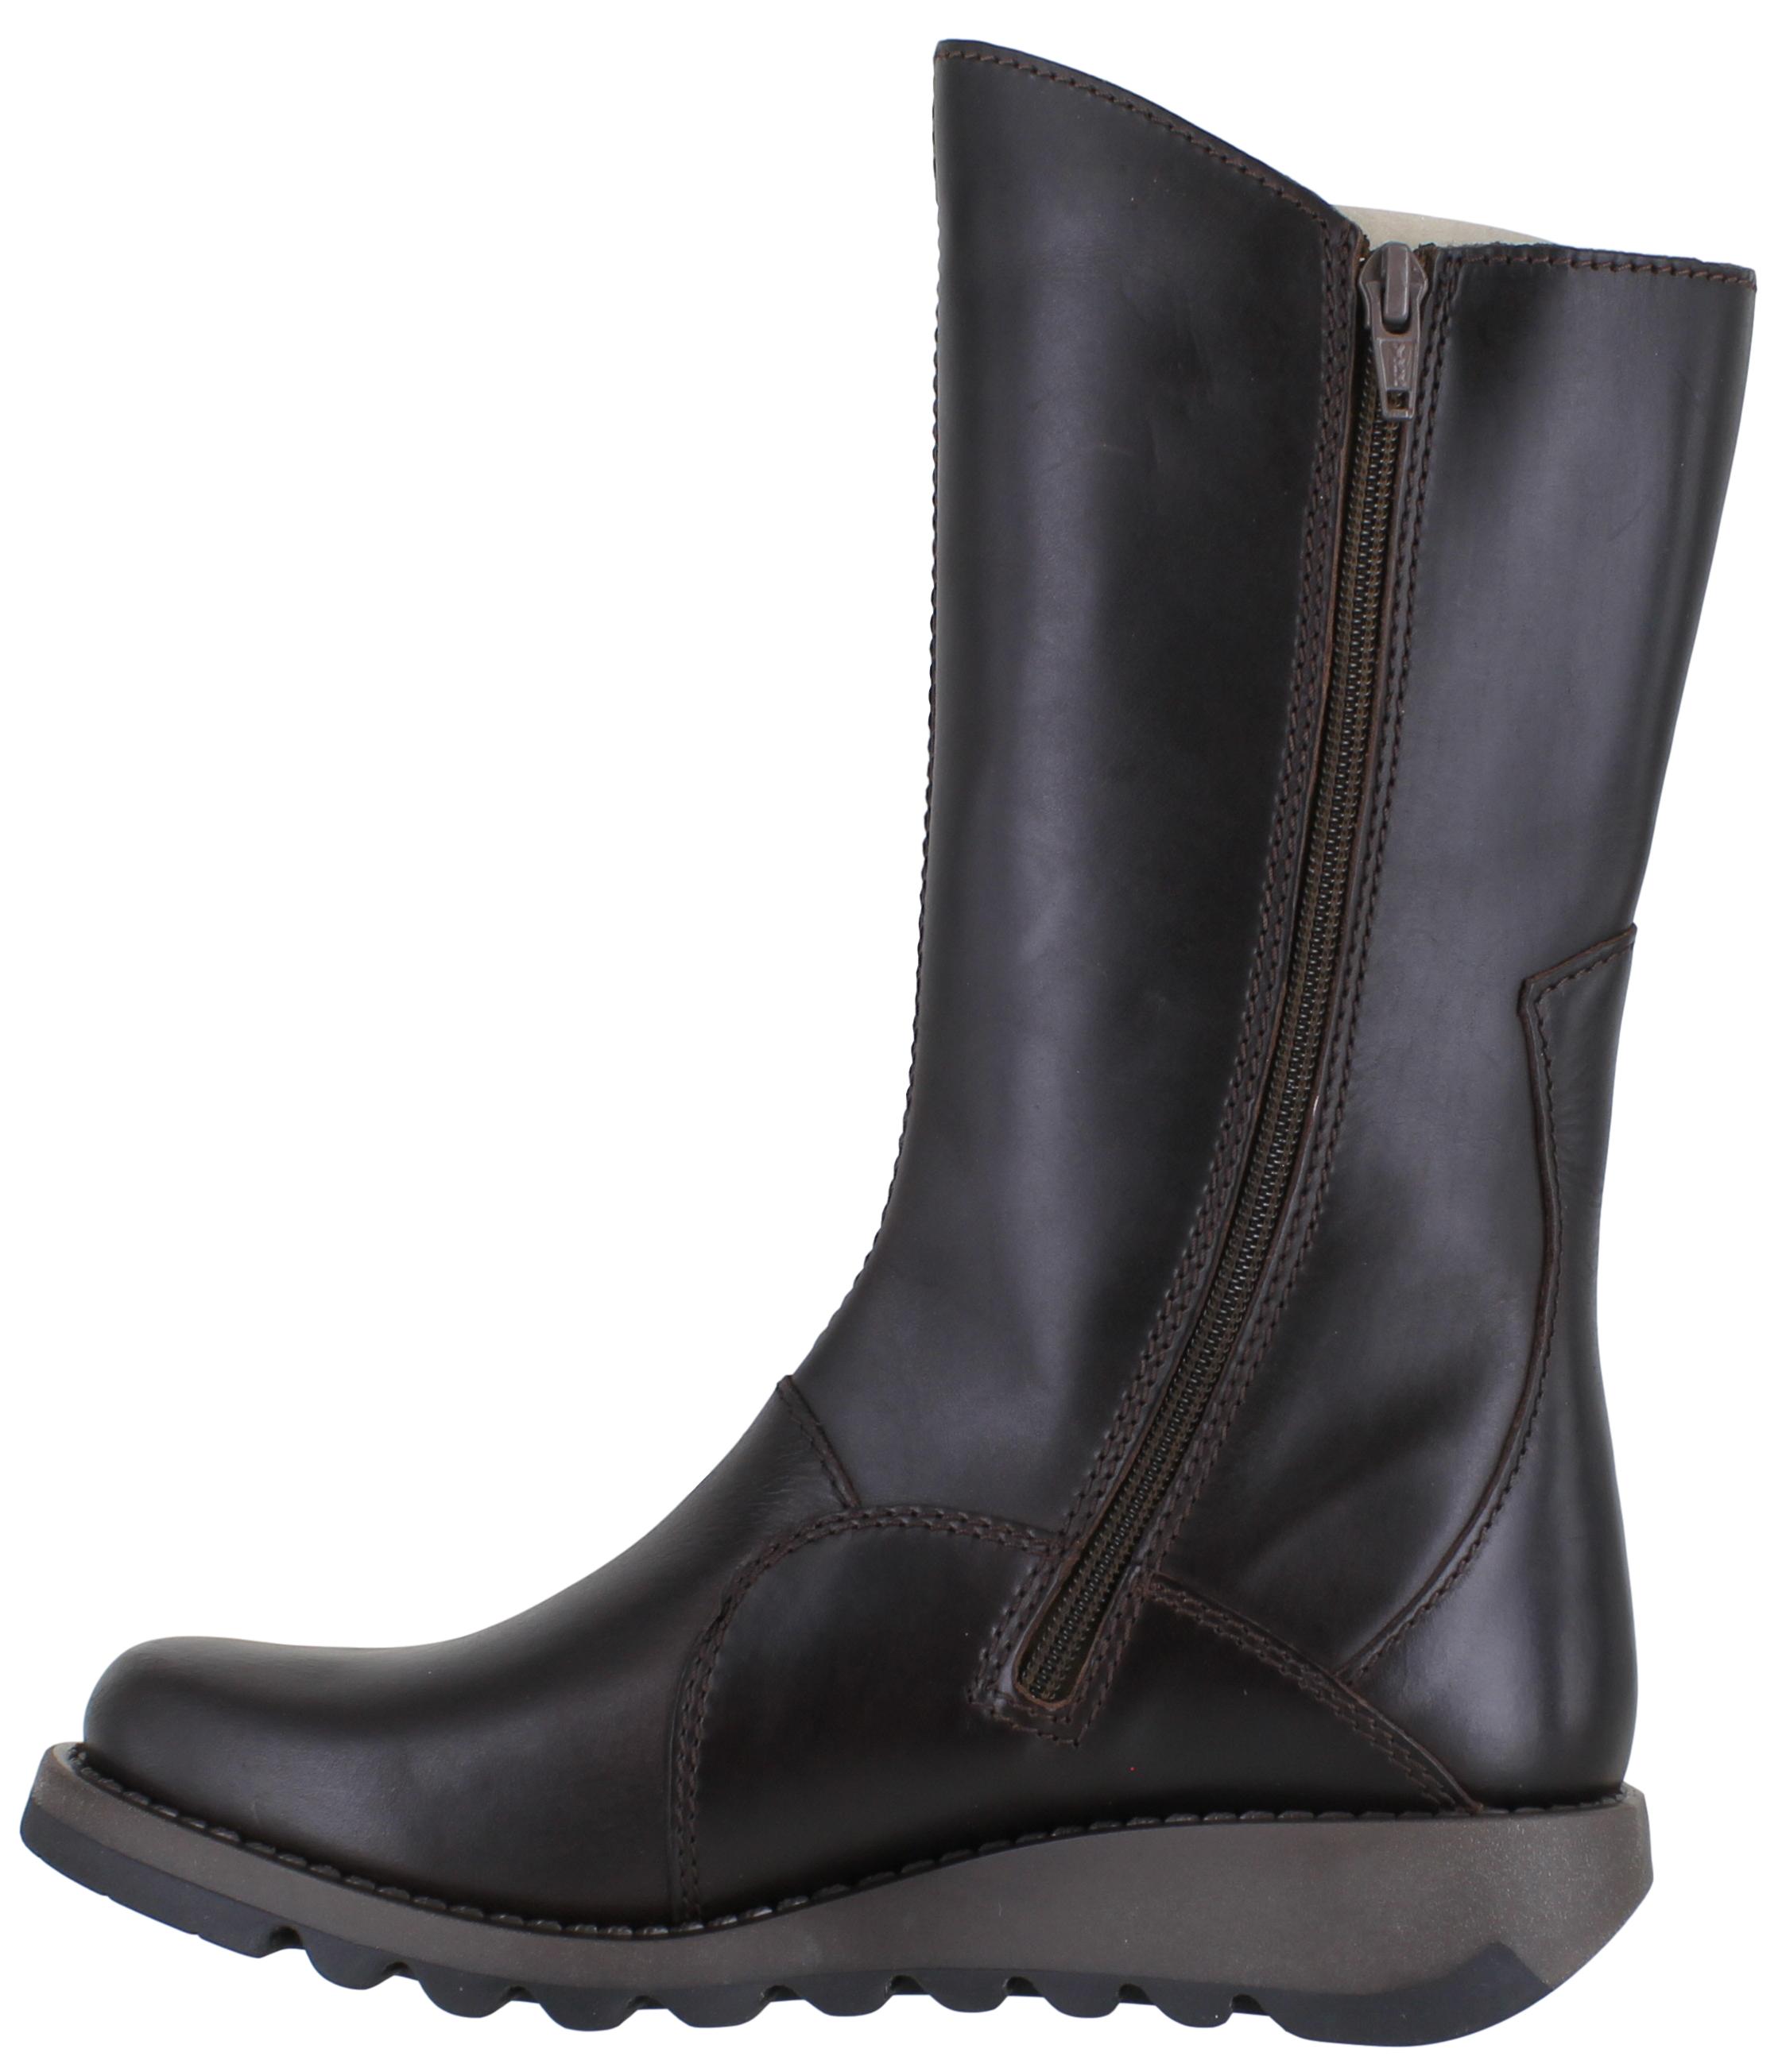 Womens Fly London Mes 2 Wedge Heel Leather Buckle Mid-Calf Boots Sizes ...